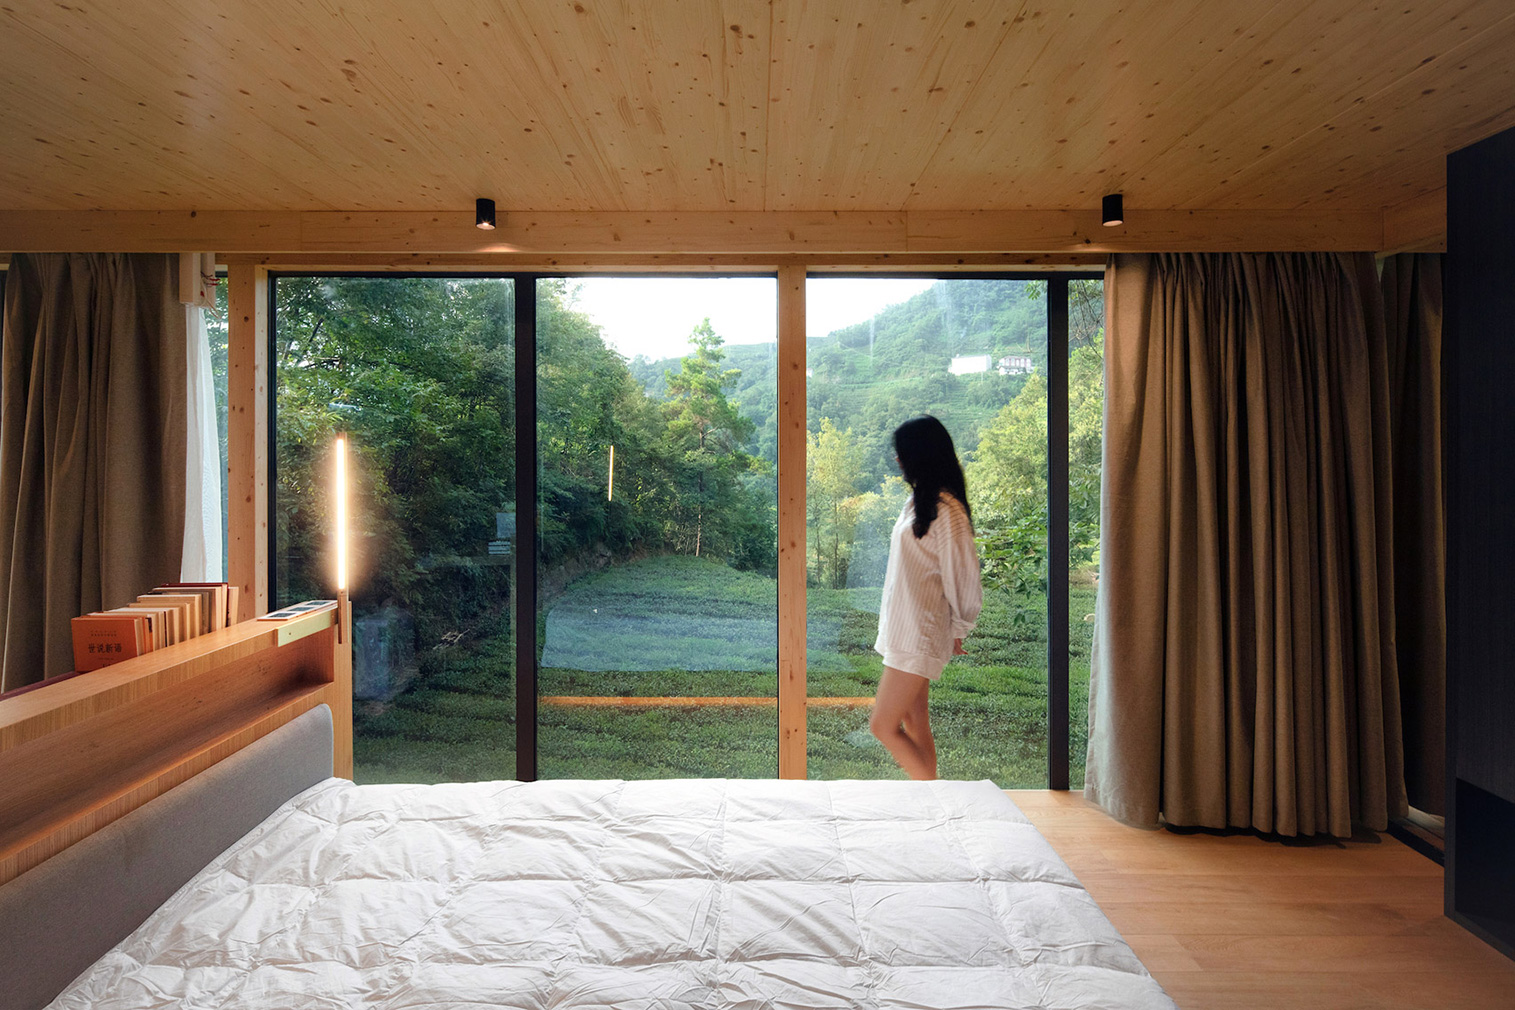 Yichang’s Mountain and Cloud Cabins are ‘spaceships in the woods’